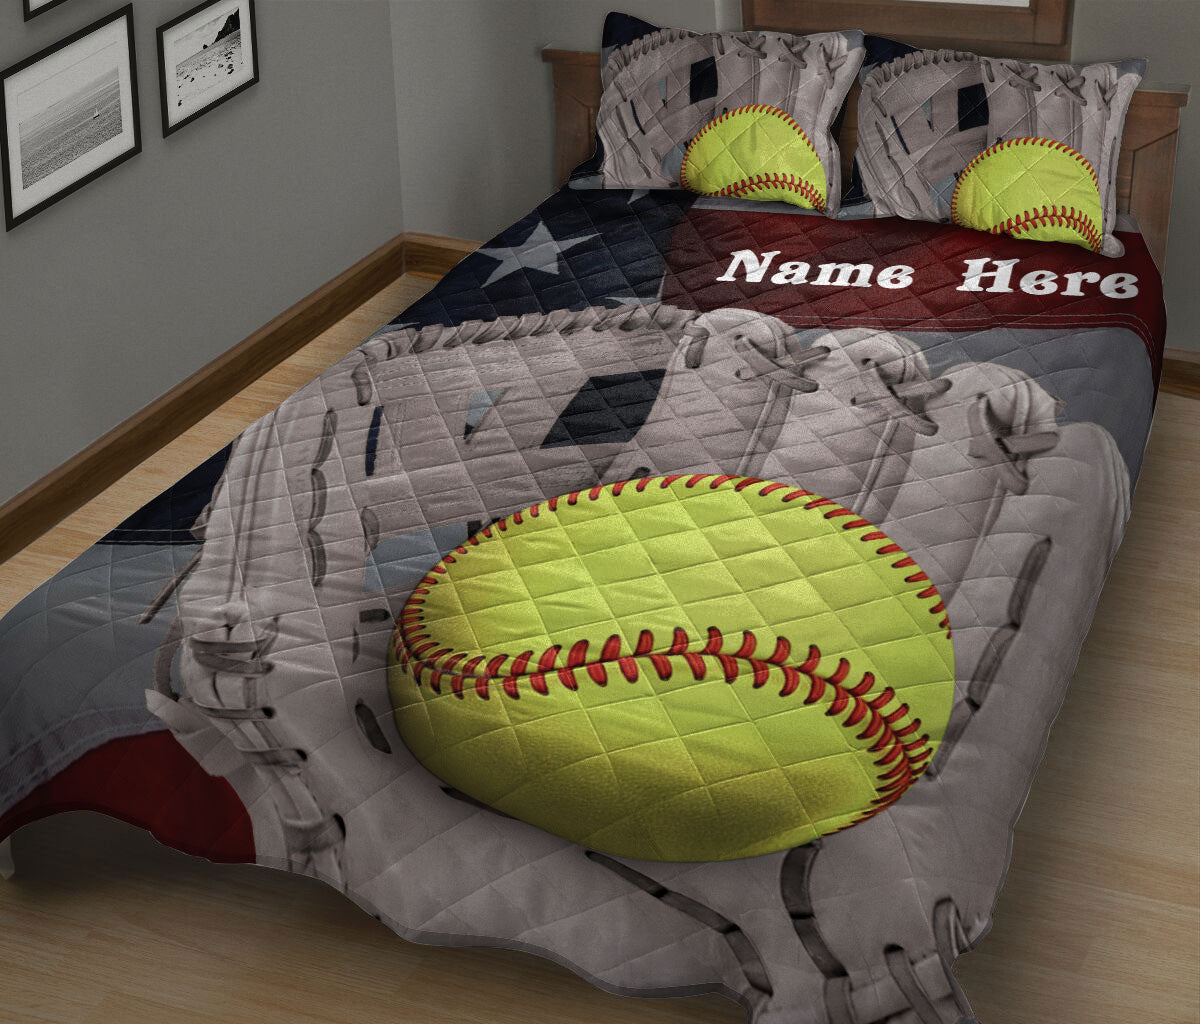 Ohaprints-Quilt-Bed-Set-Pillowcase-Softball-Crack-American-Flag-Sports-Lover-Gift-Custom-Personalized-Name-Blanket-Bedspread-Bedding-18-King (90'' x 100'')